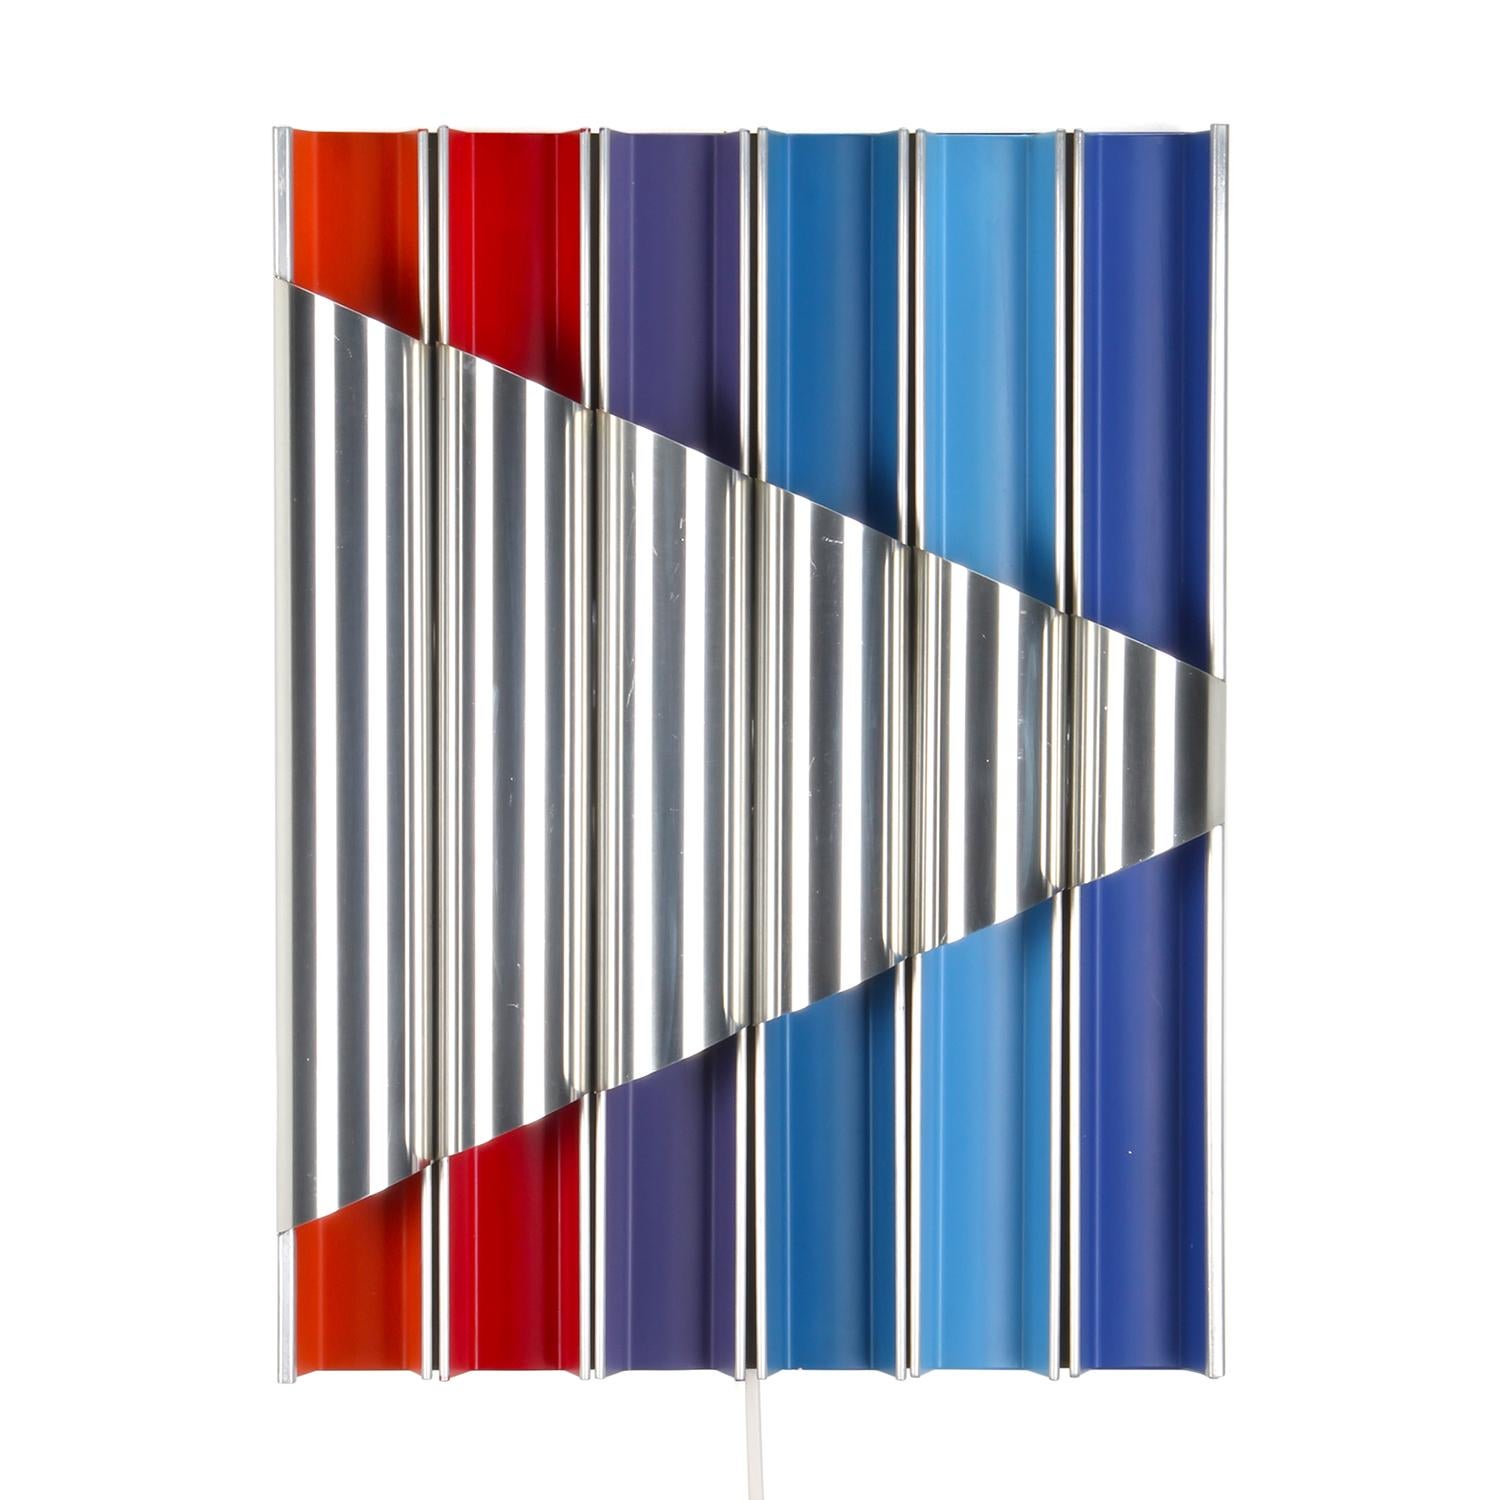 Panflute Extremely Rare Wall Piece by Bent Karlby 1968 Lyfa